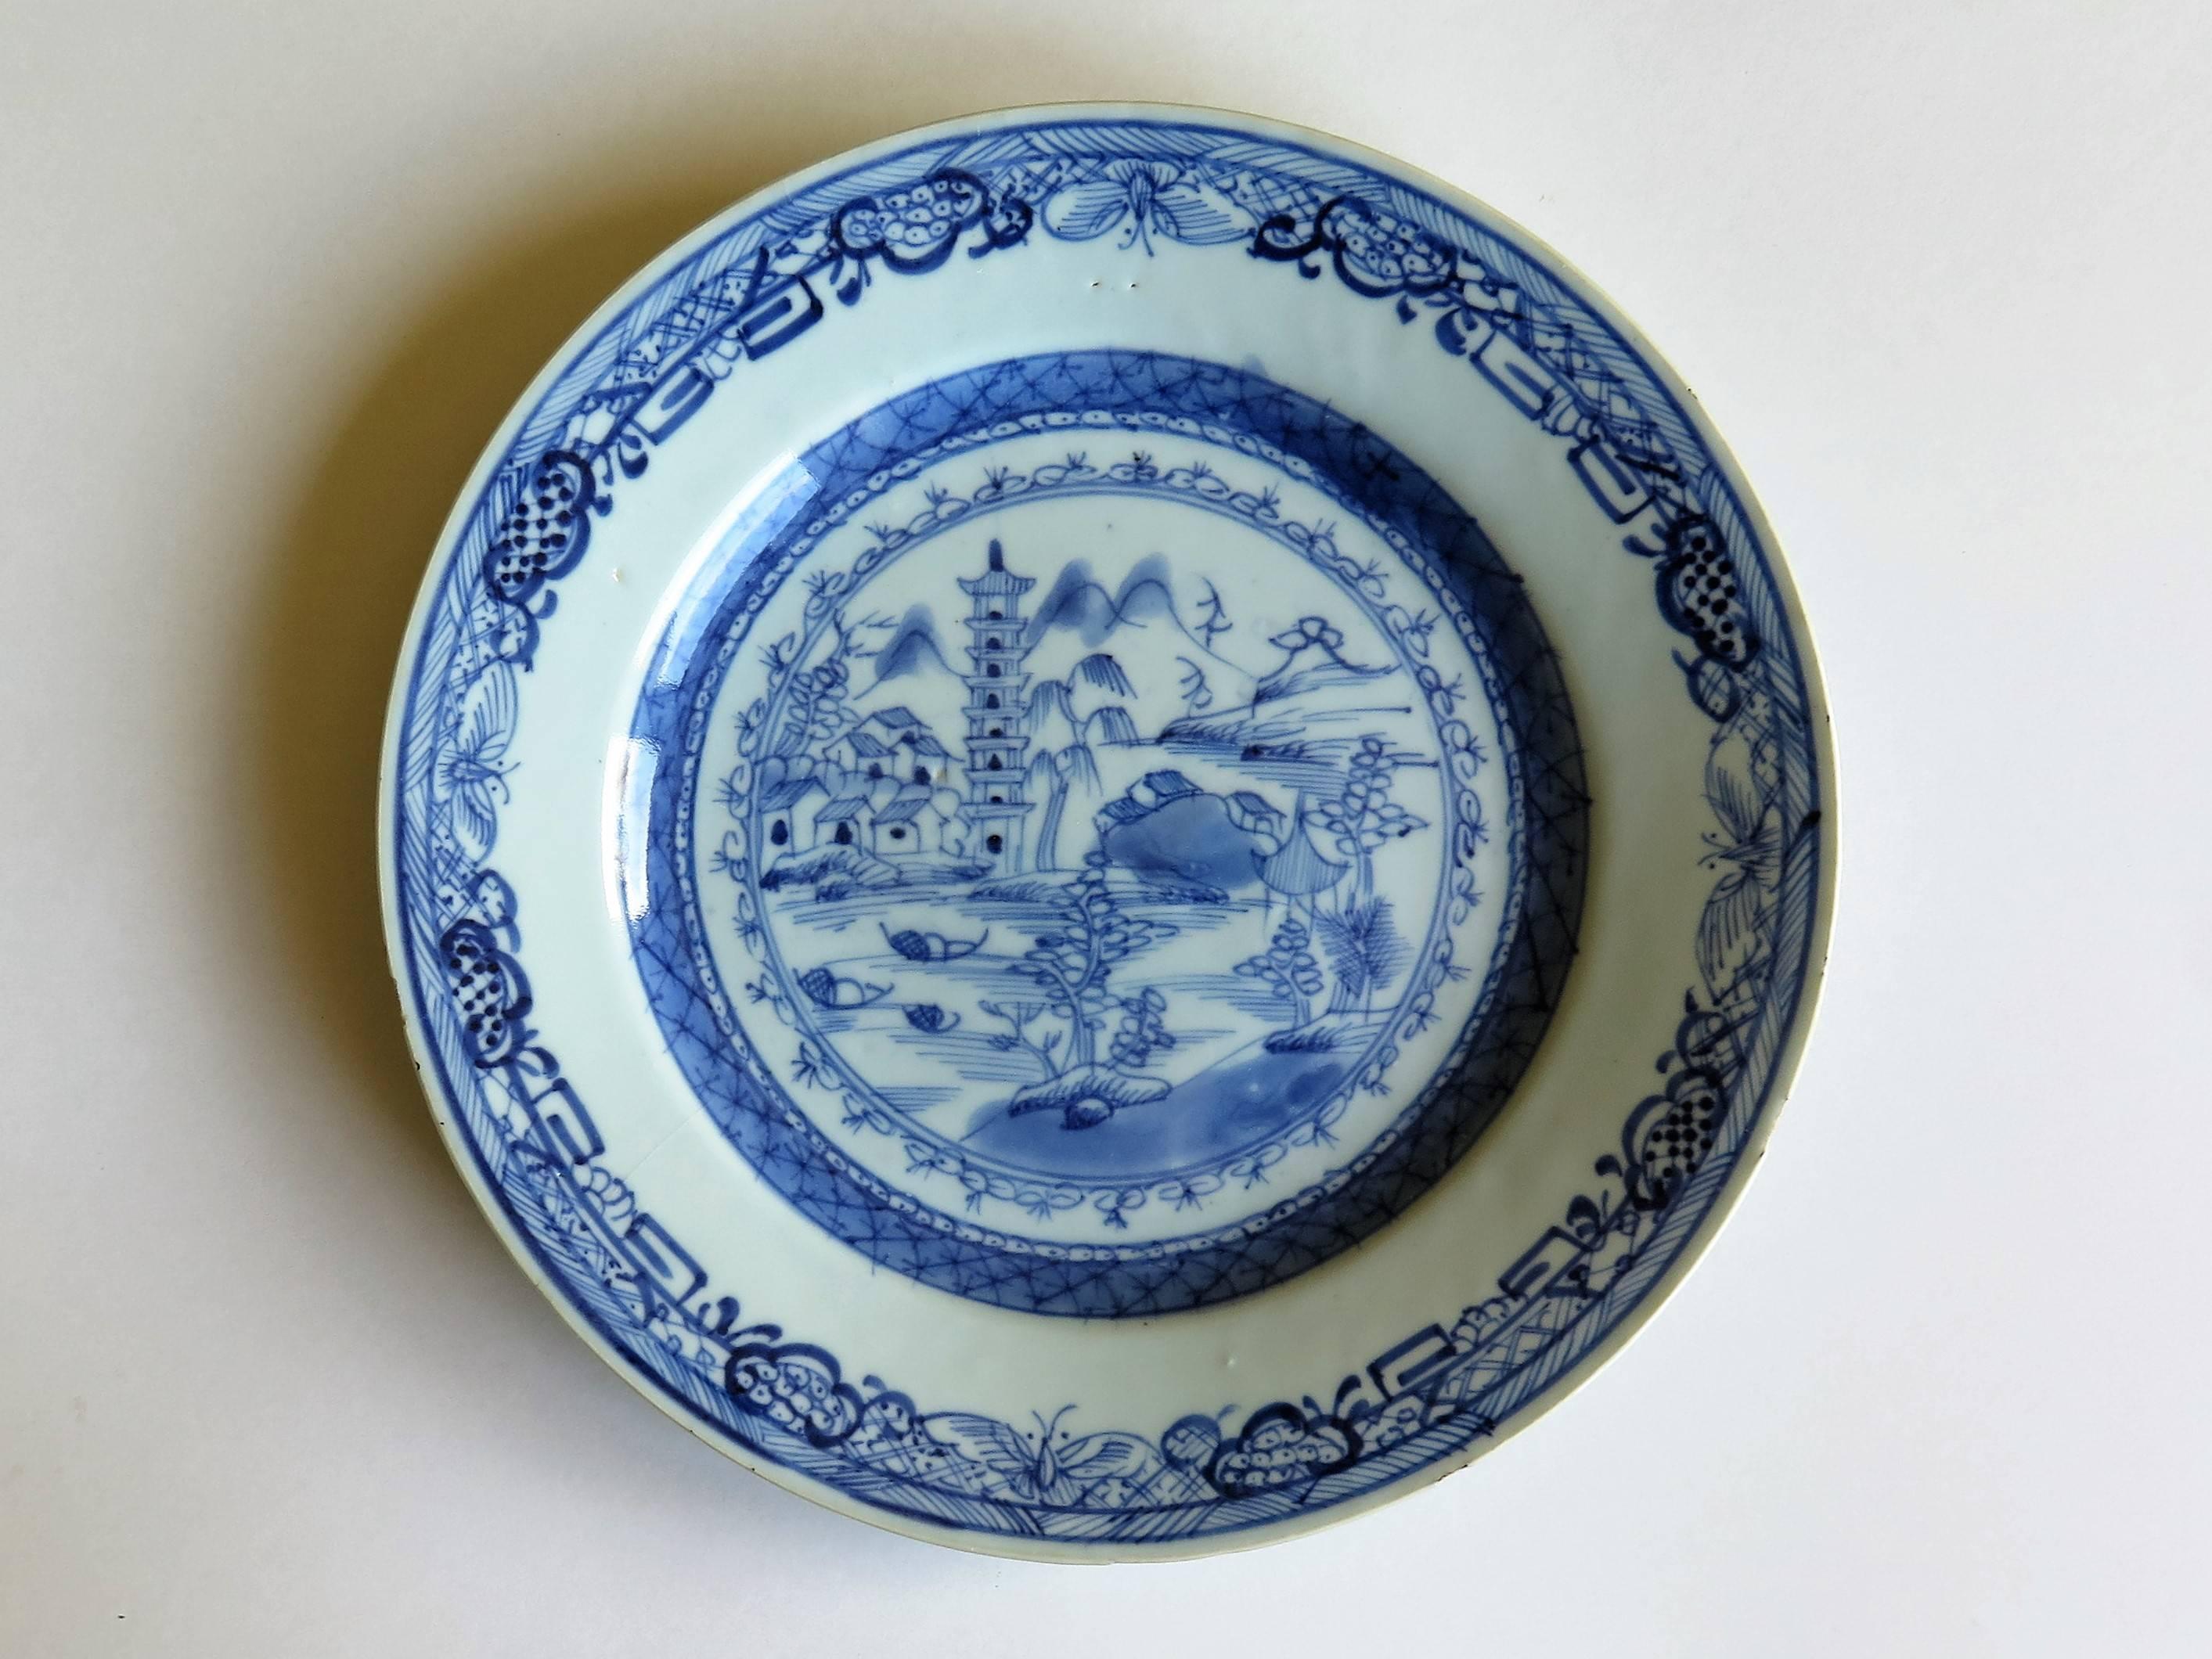 This is a good Chinese Porcelain, blue and white plate made for the export (Canton) market.

The plate is circular in shape, decorated in varying shades of cobalt blue, with a glaze of a very light blue shade. The foot rim has been neatly trimmed